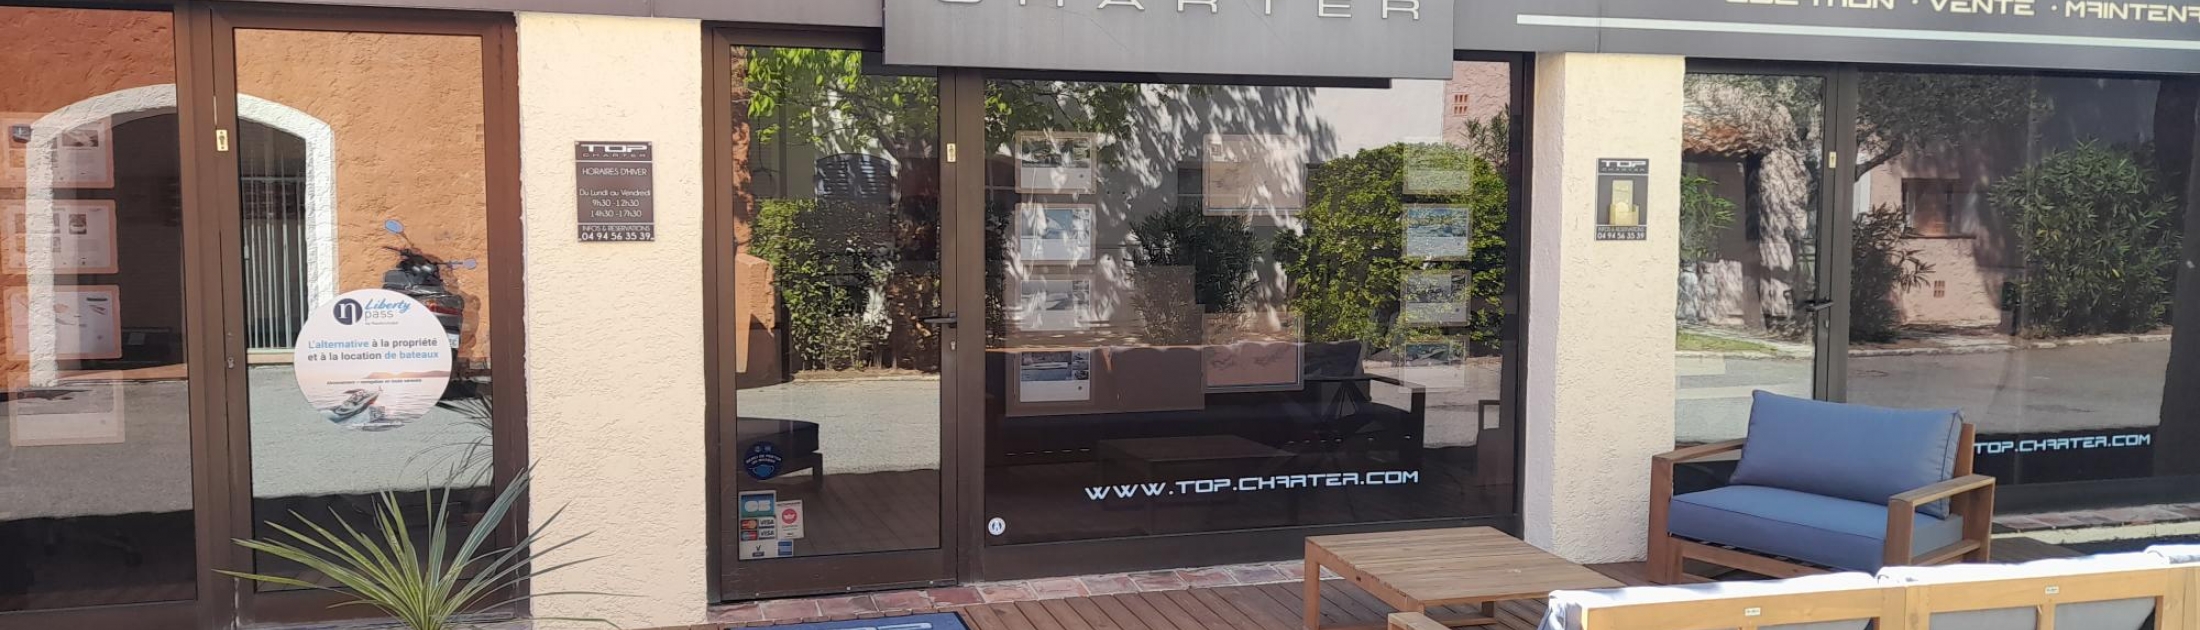 L'agence Top Charter